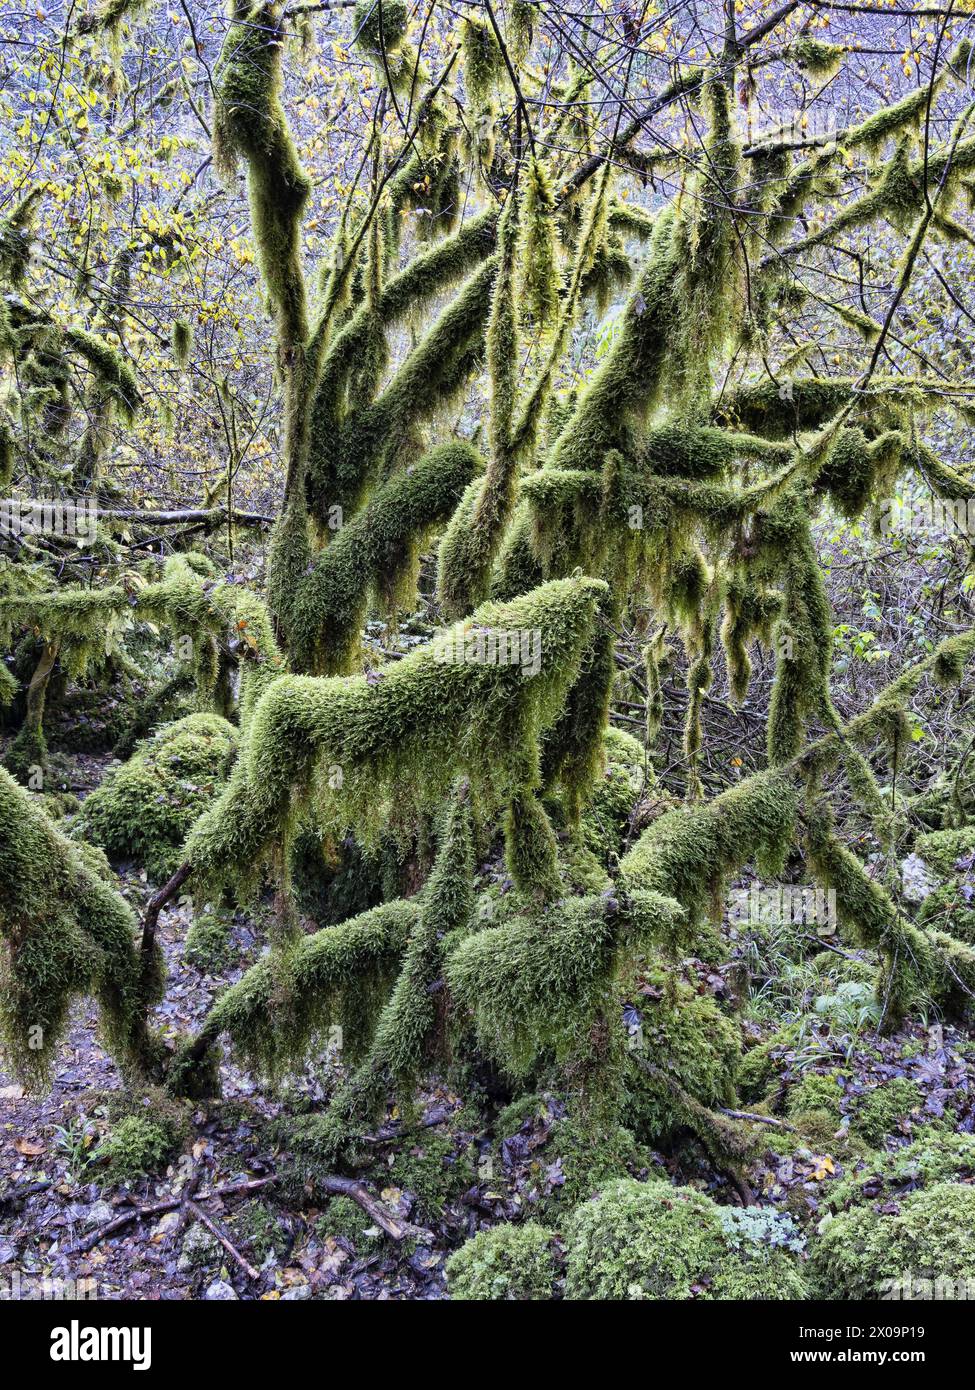 A colony of mosses (Bryum argenteum, Bryophyta) envelops tree trunks and branches in a forest. Stock Photo